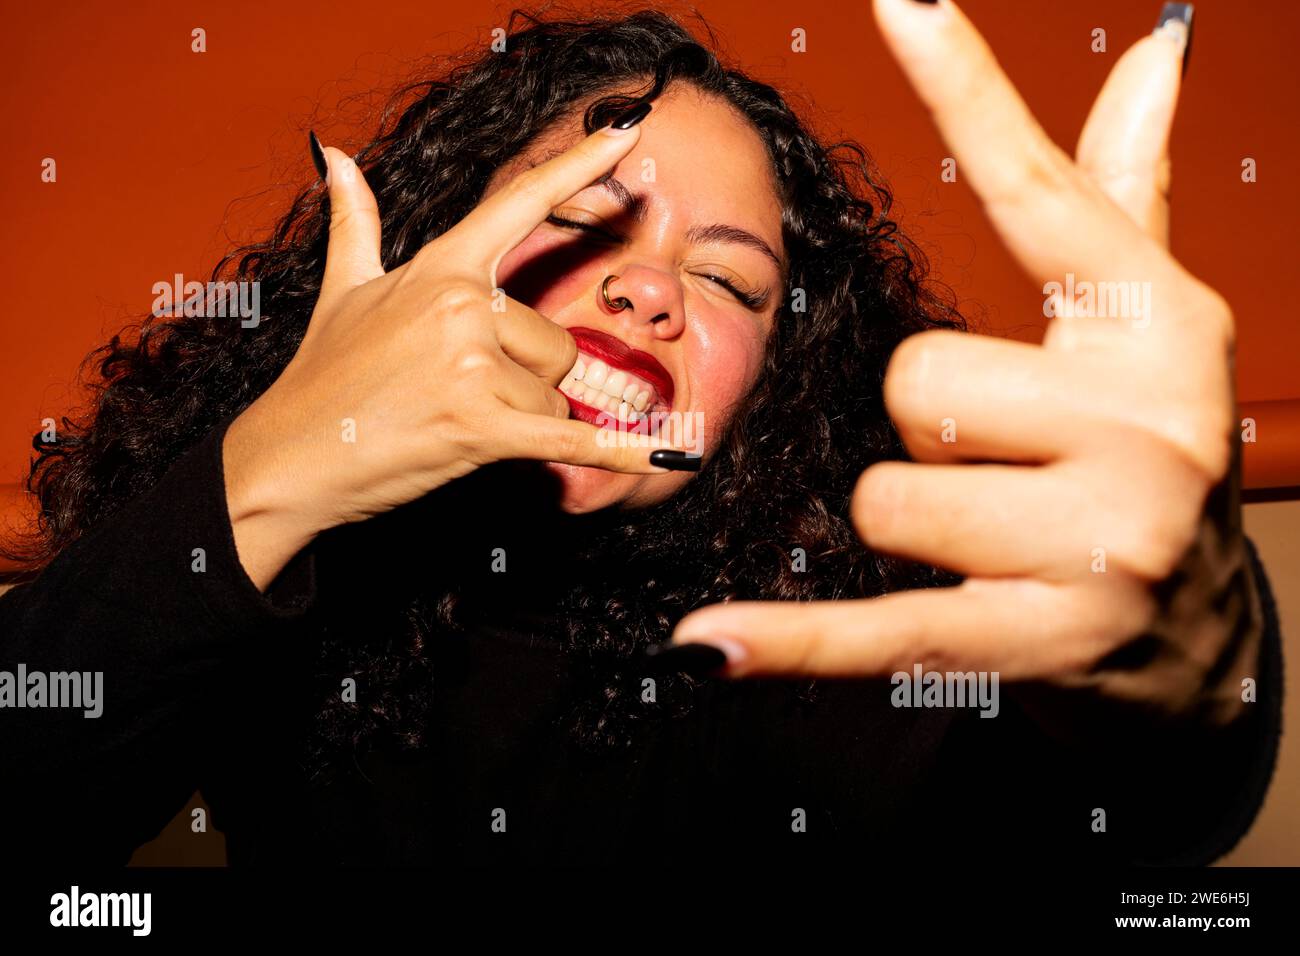 Young woman with cool attitude making Shaka sign Stock Photo